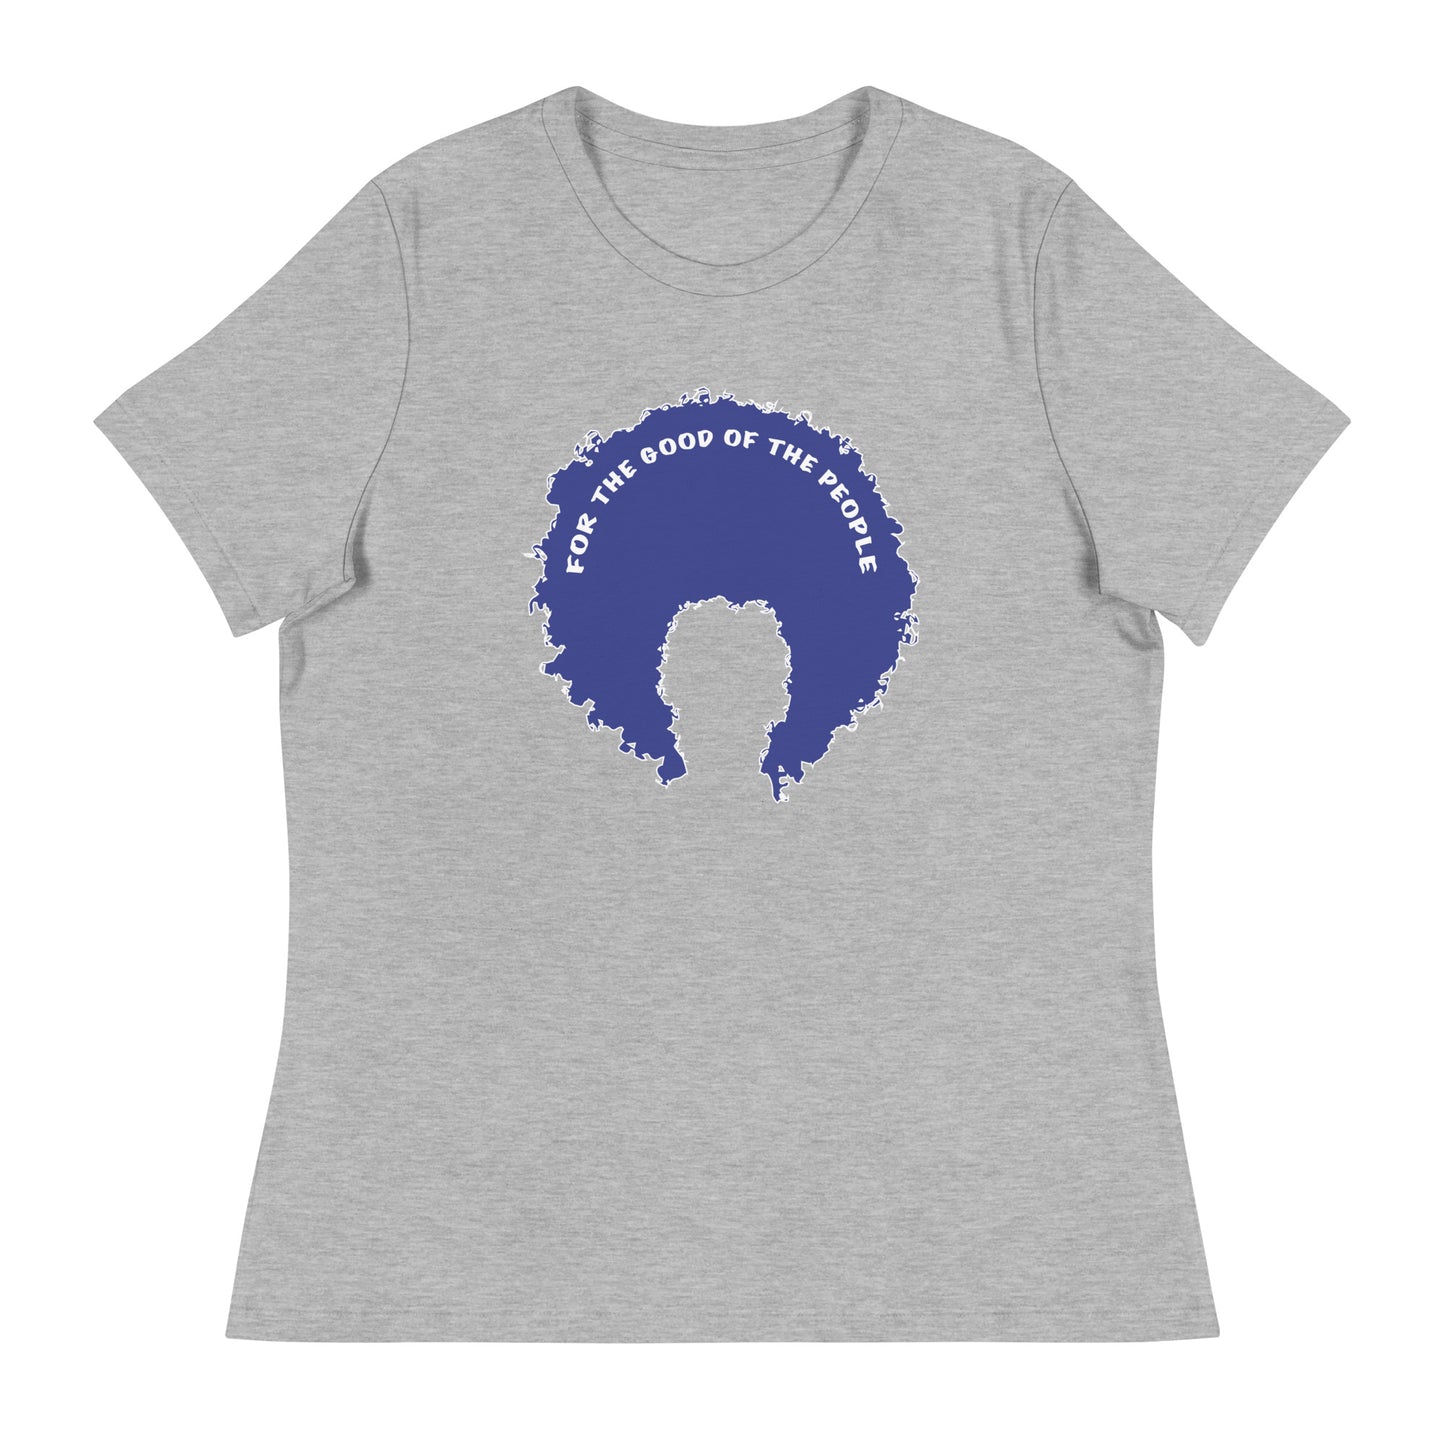 Heather gray women's tee with blue afro graphic trimmed in white with for the good of the people in white on the inside top of the afro.